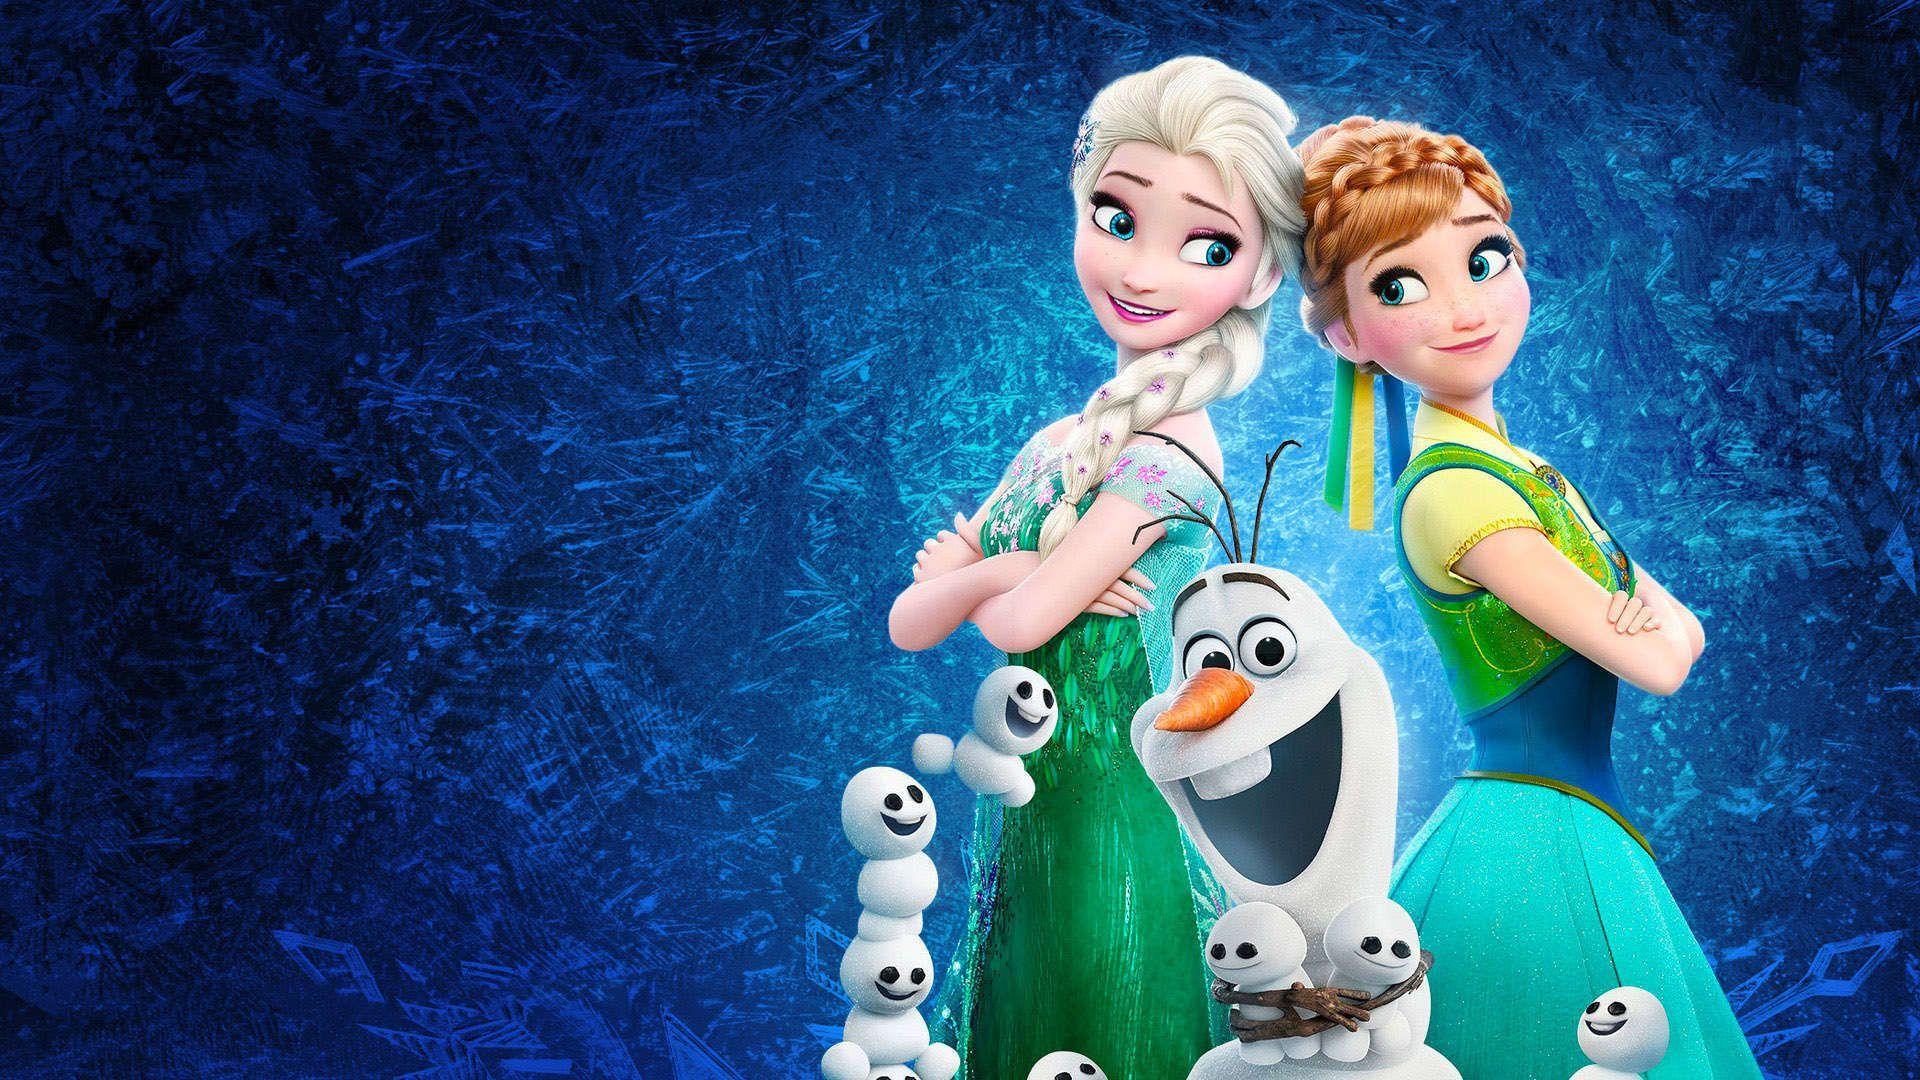 You can also upload and share your favorite Frozen 2 Queen Elsa Anna Kristo...